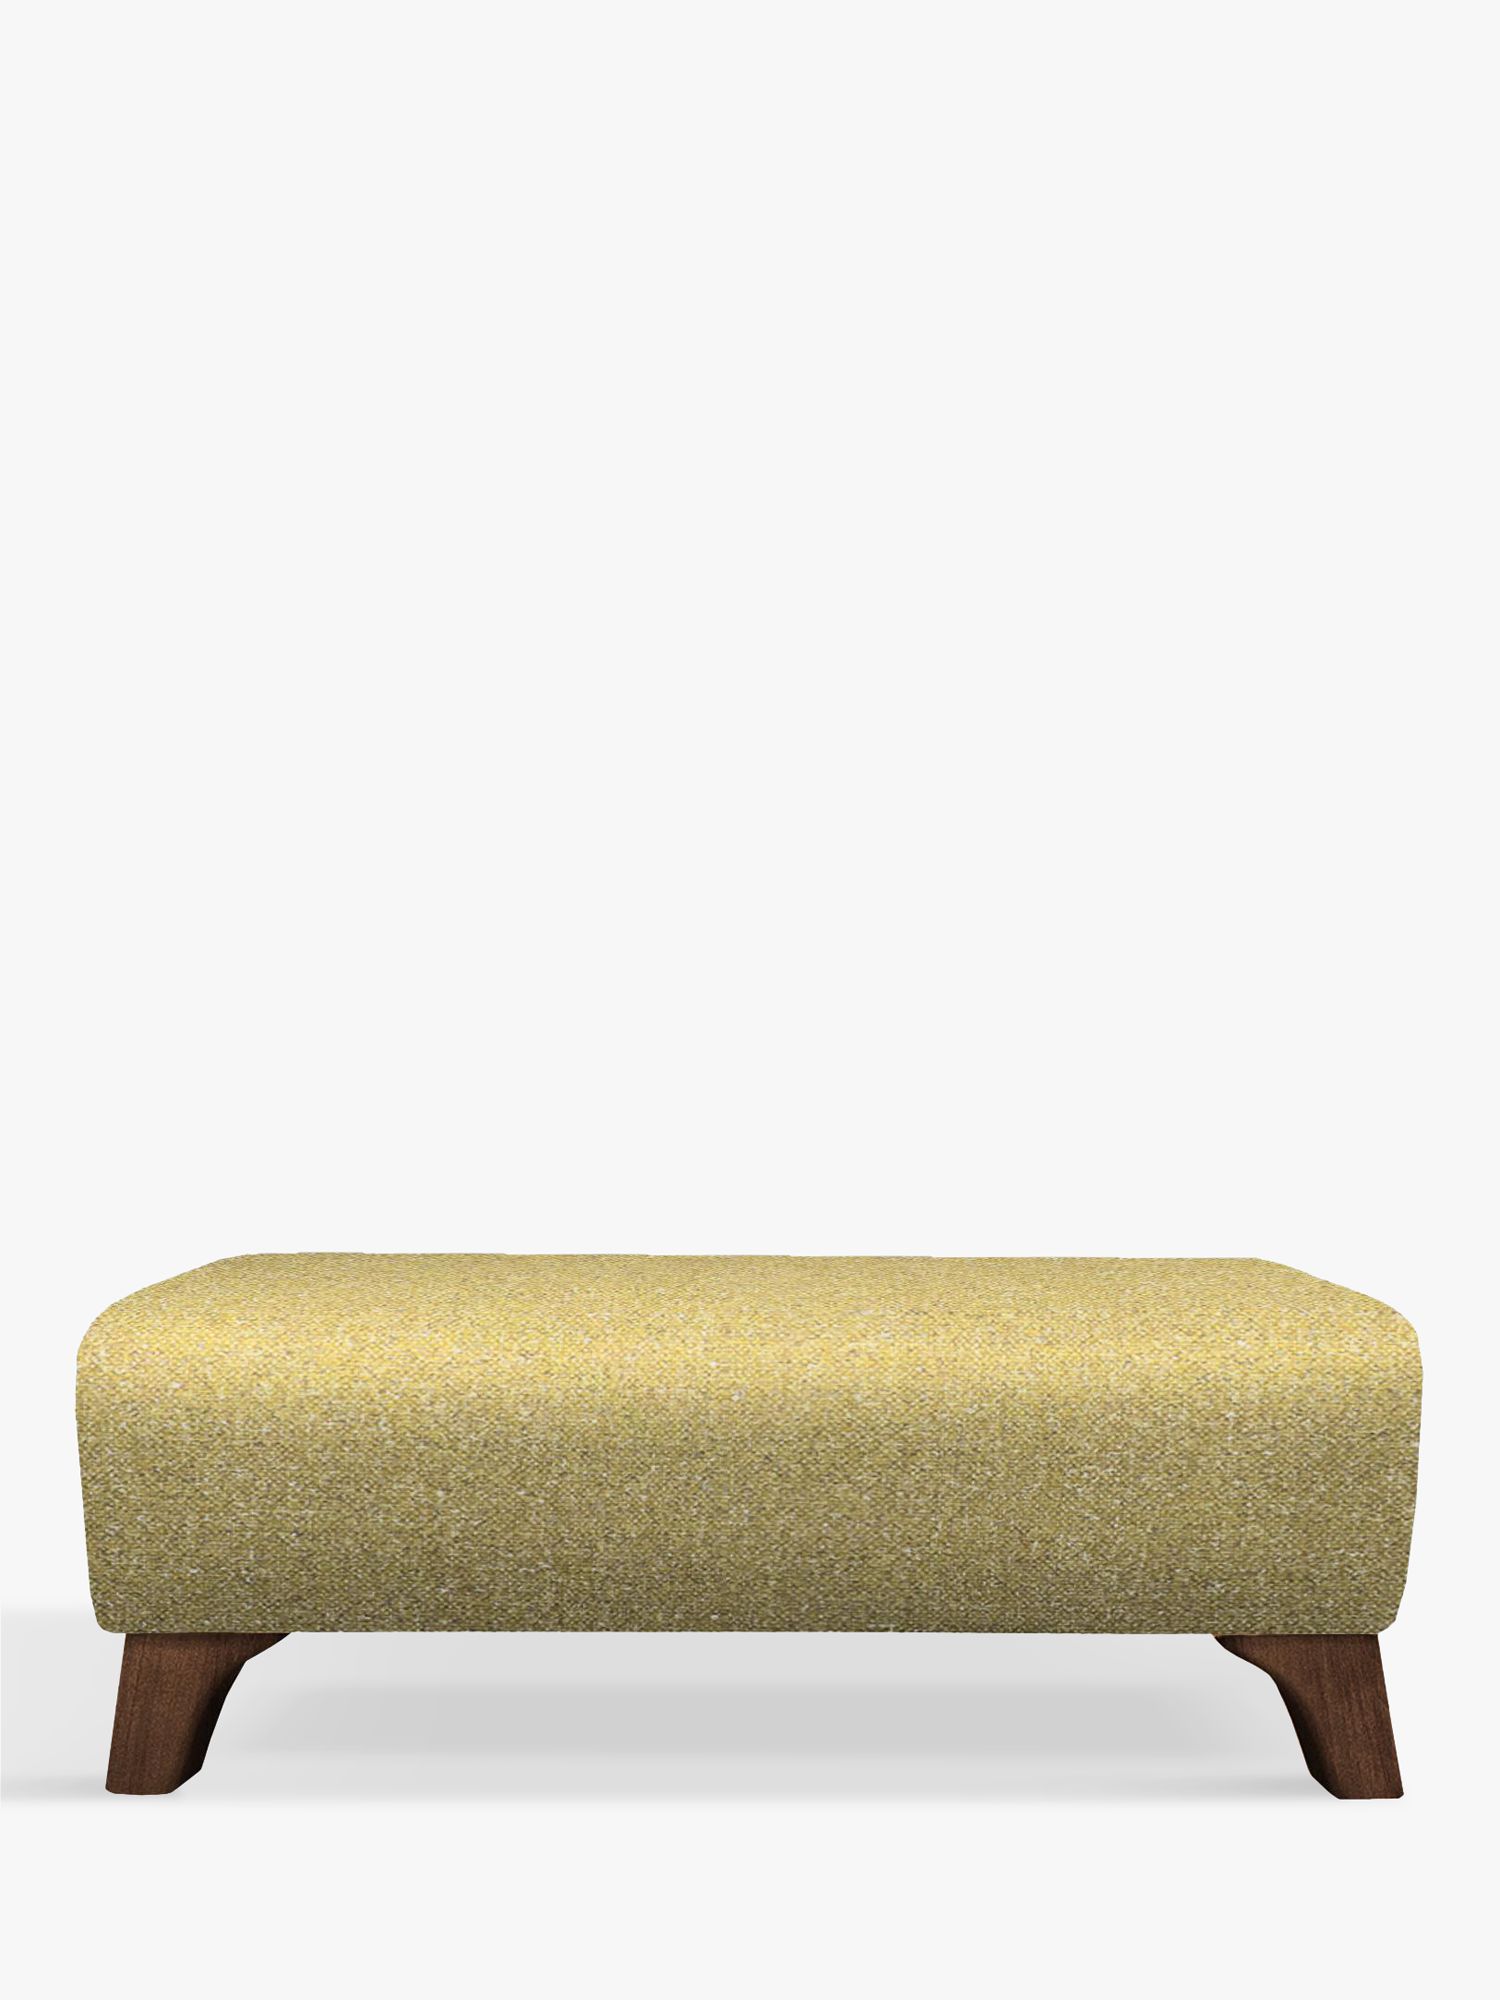 The Sixty Eight Range, G Plan Vintage The Sixty Eight Footstool, Tweed Citrus